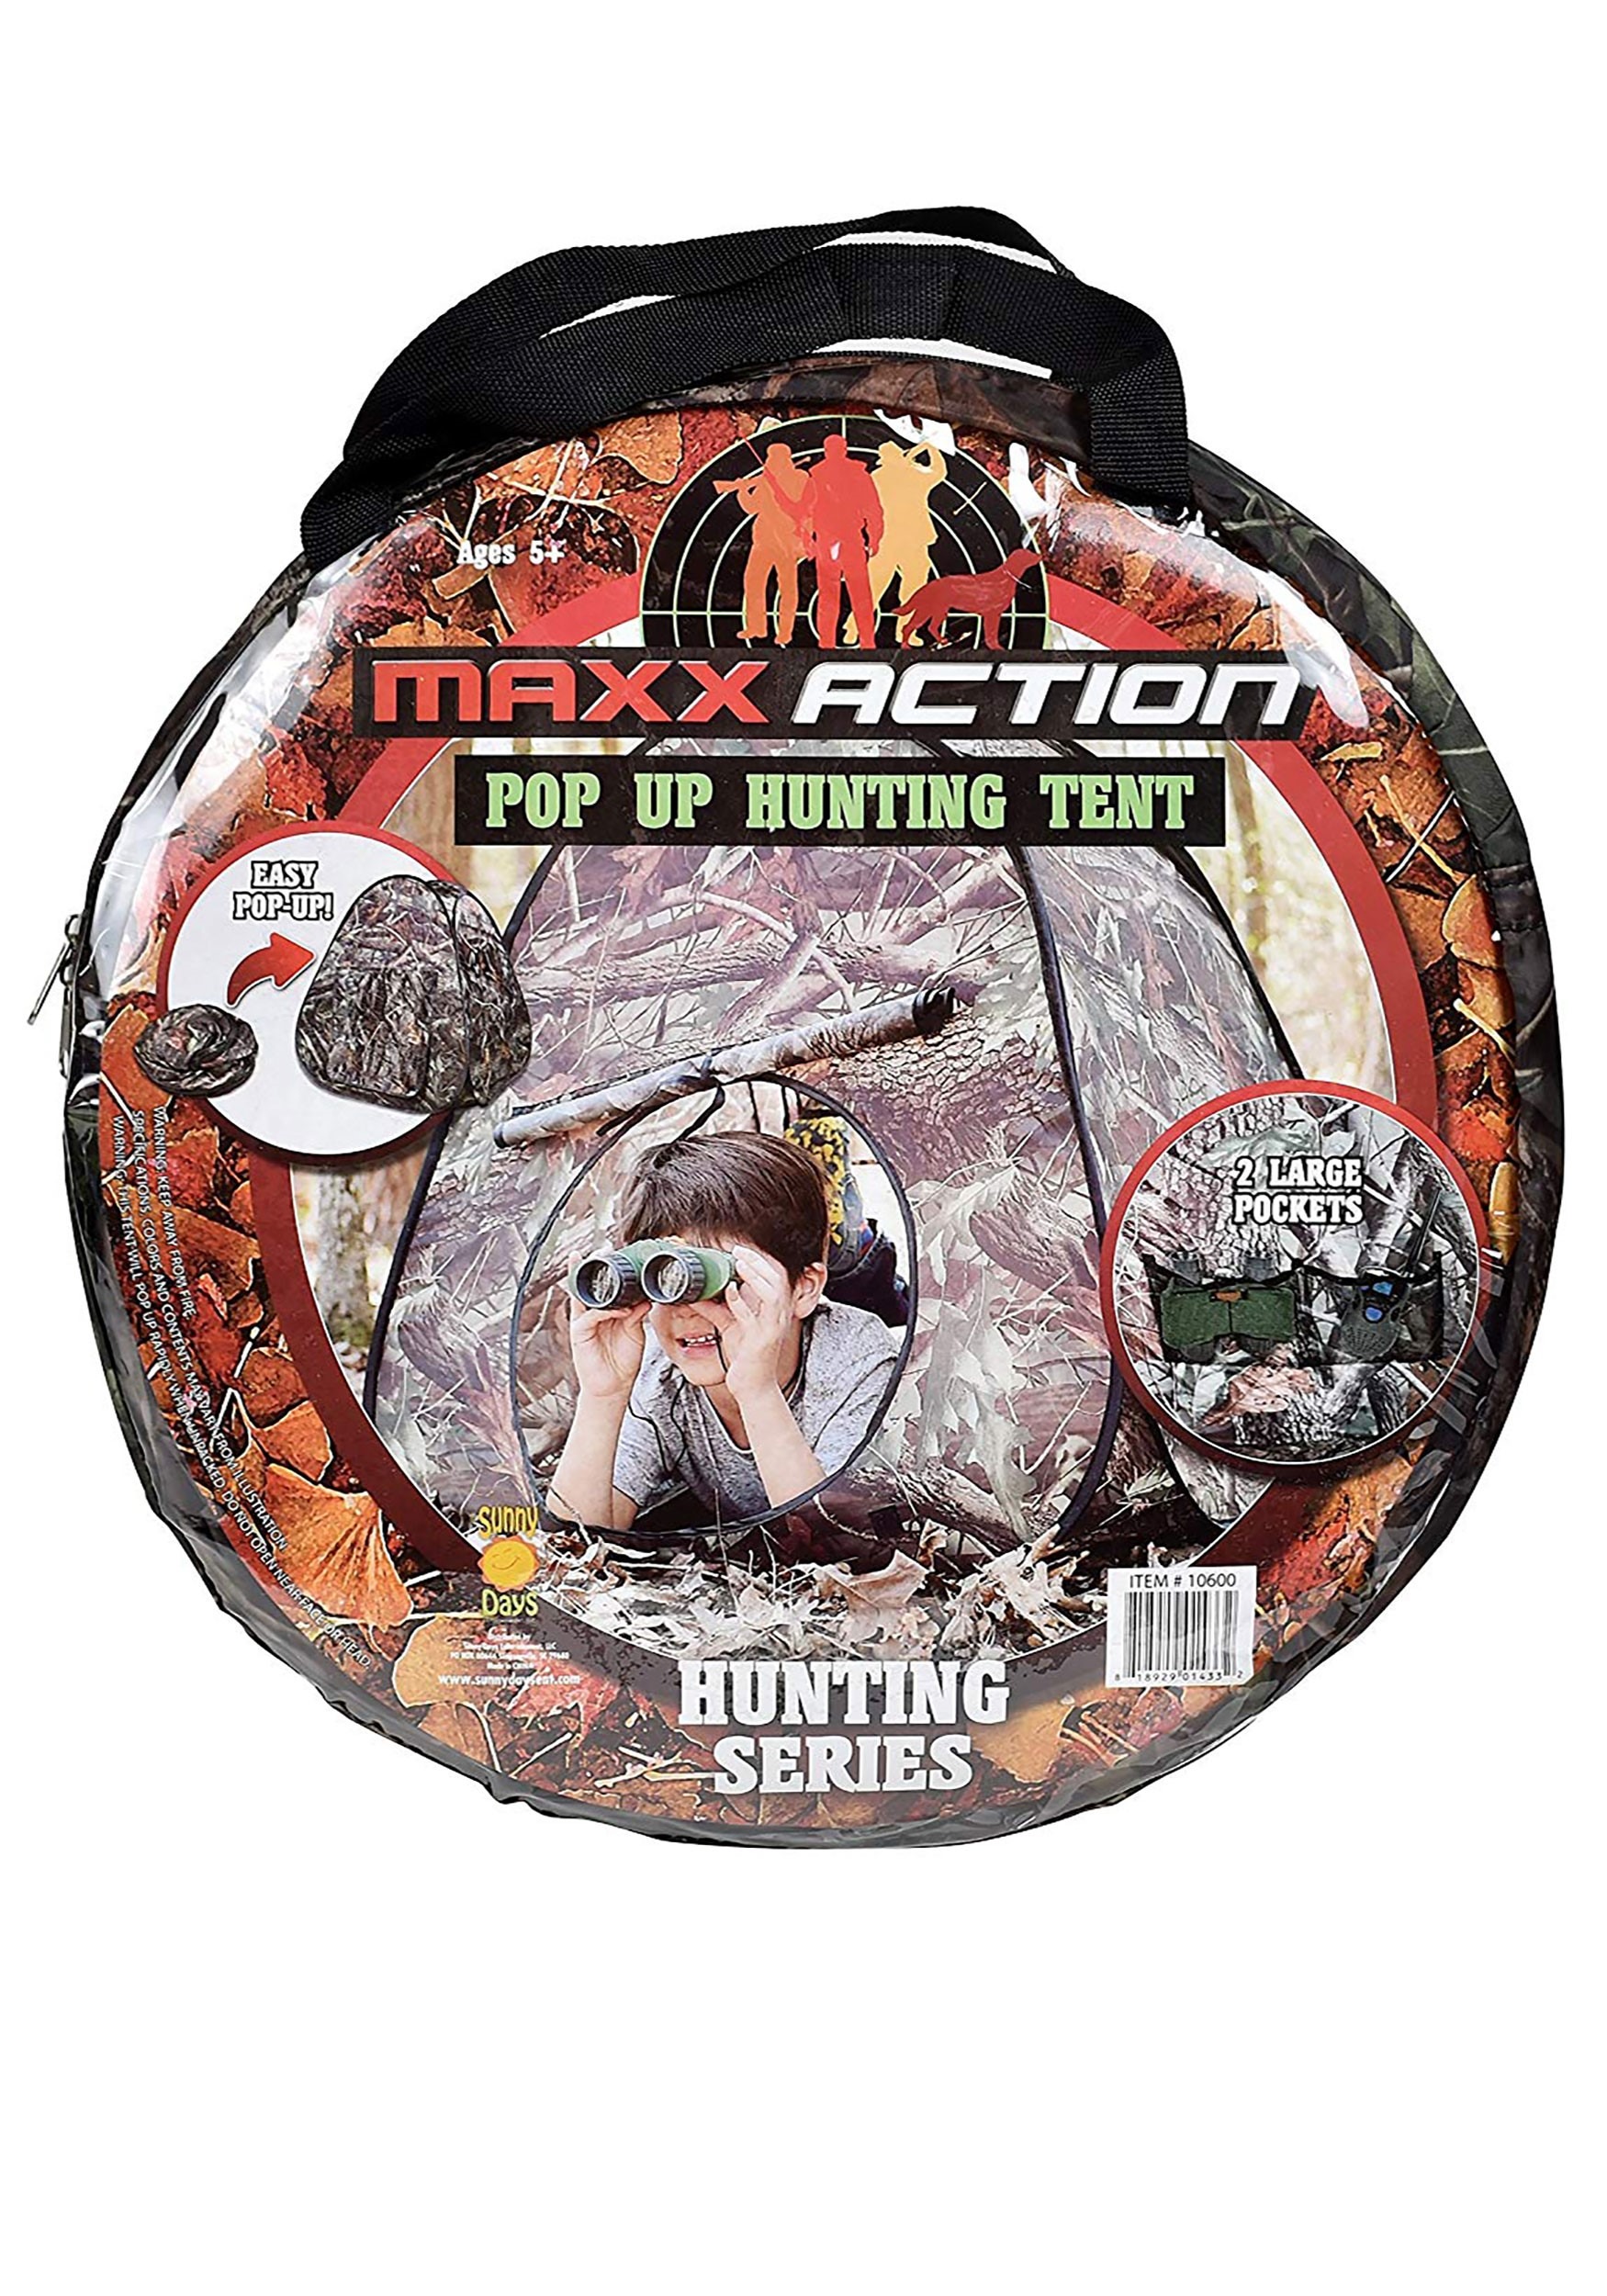 Maxx Action Camo Pop Up Hunting Tent